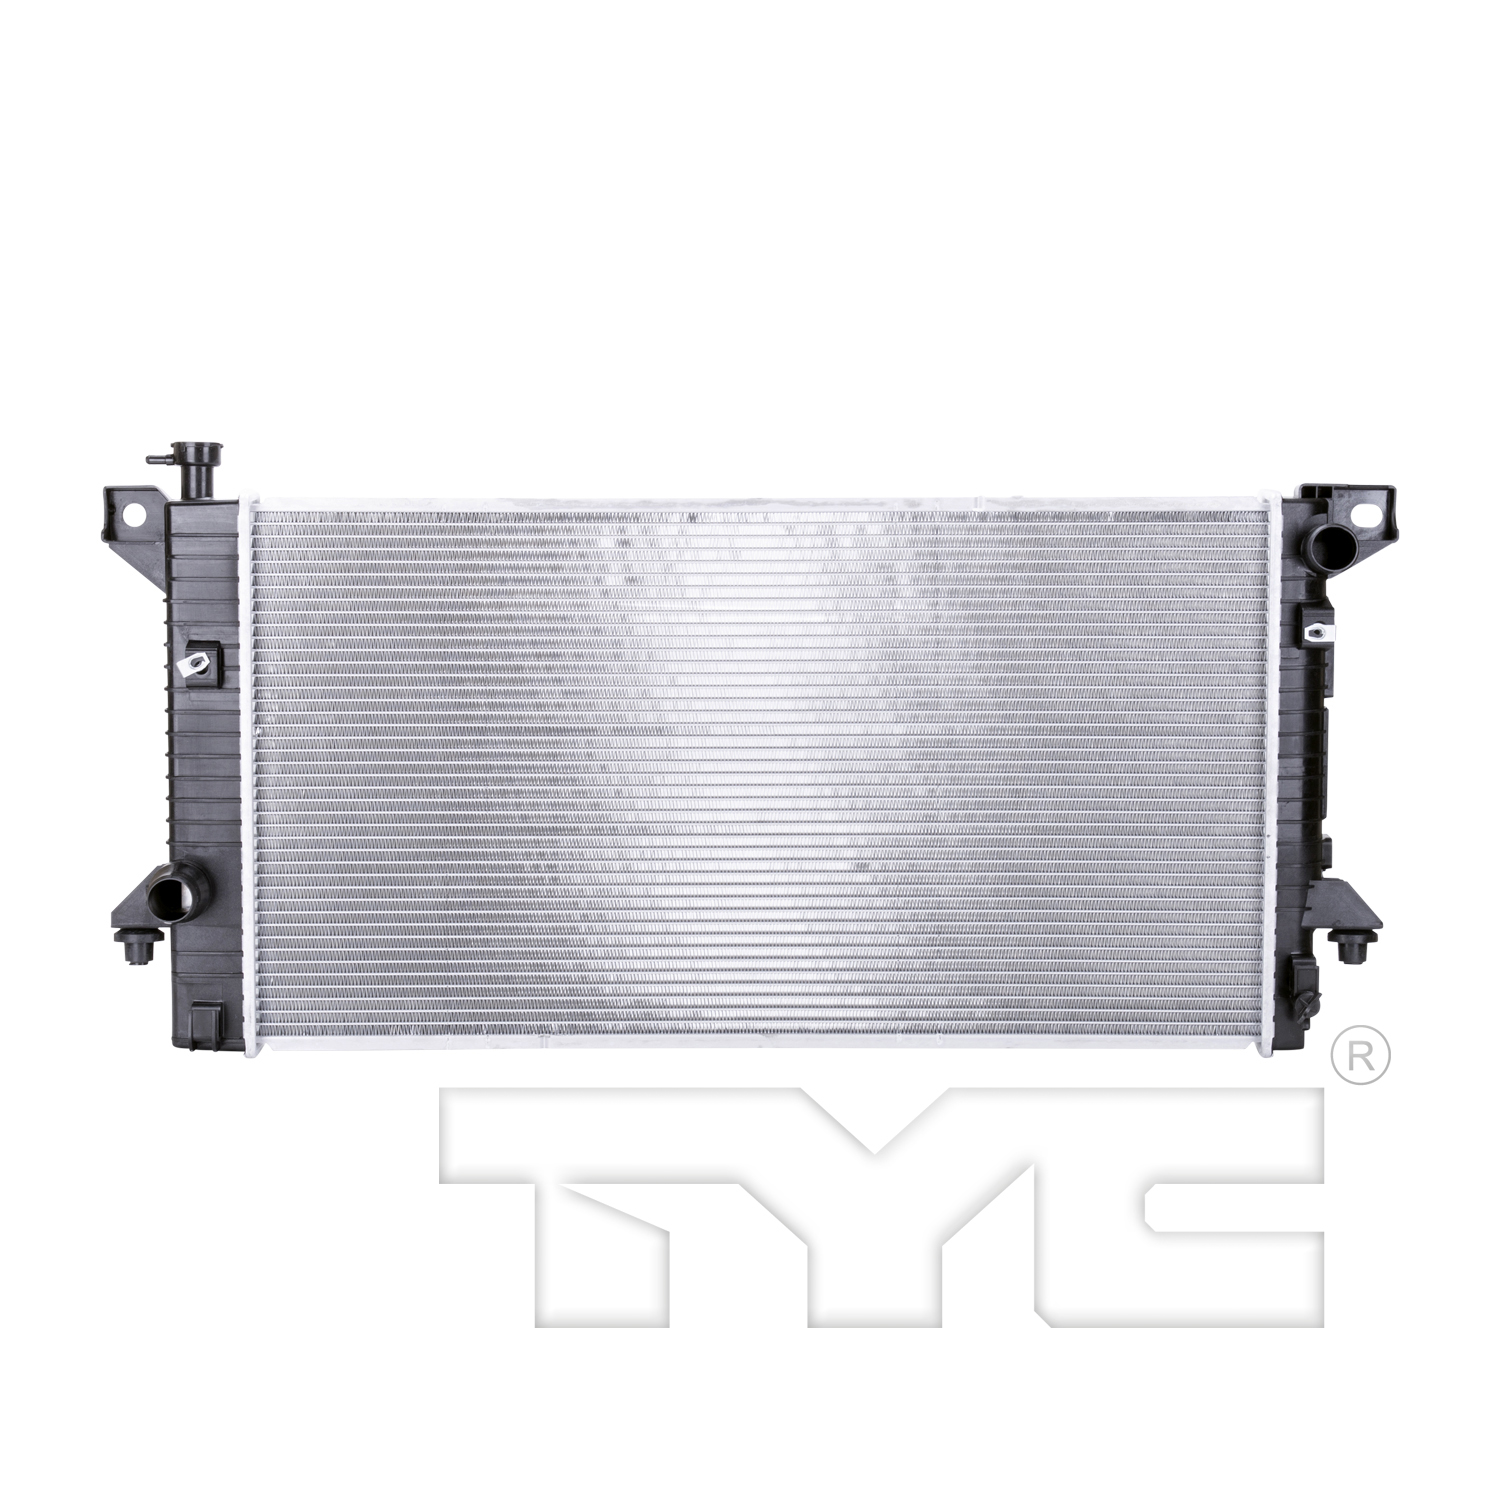 Aftermarket RADIATORS for FORD - EXPEDITION, EXPEDITION,08-14,Radiator assembly